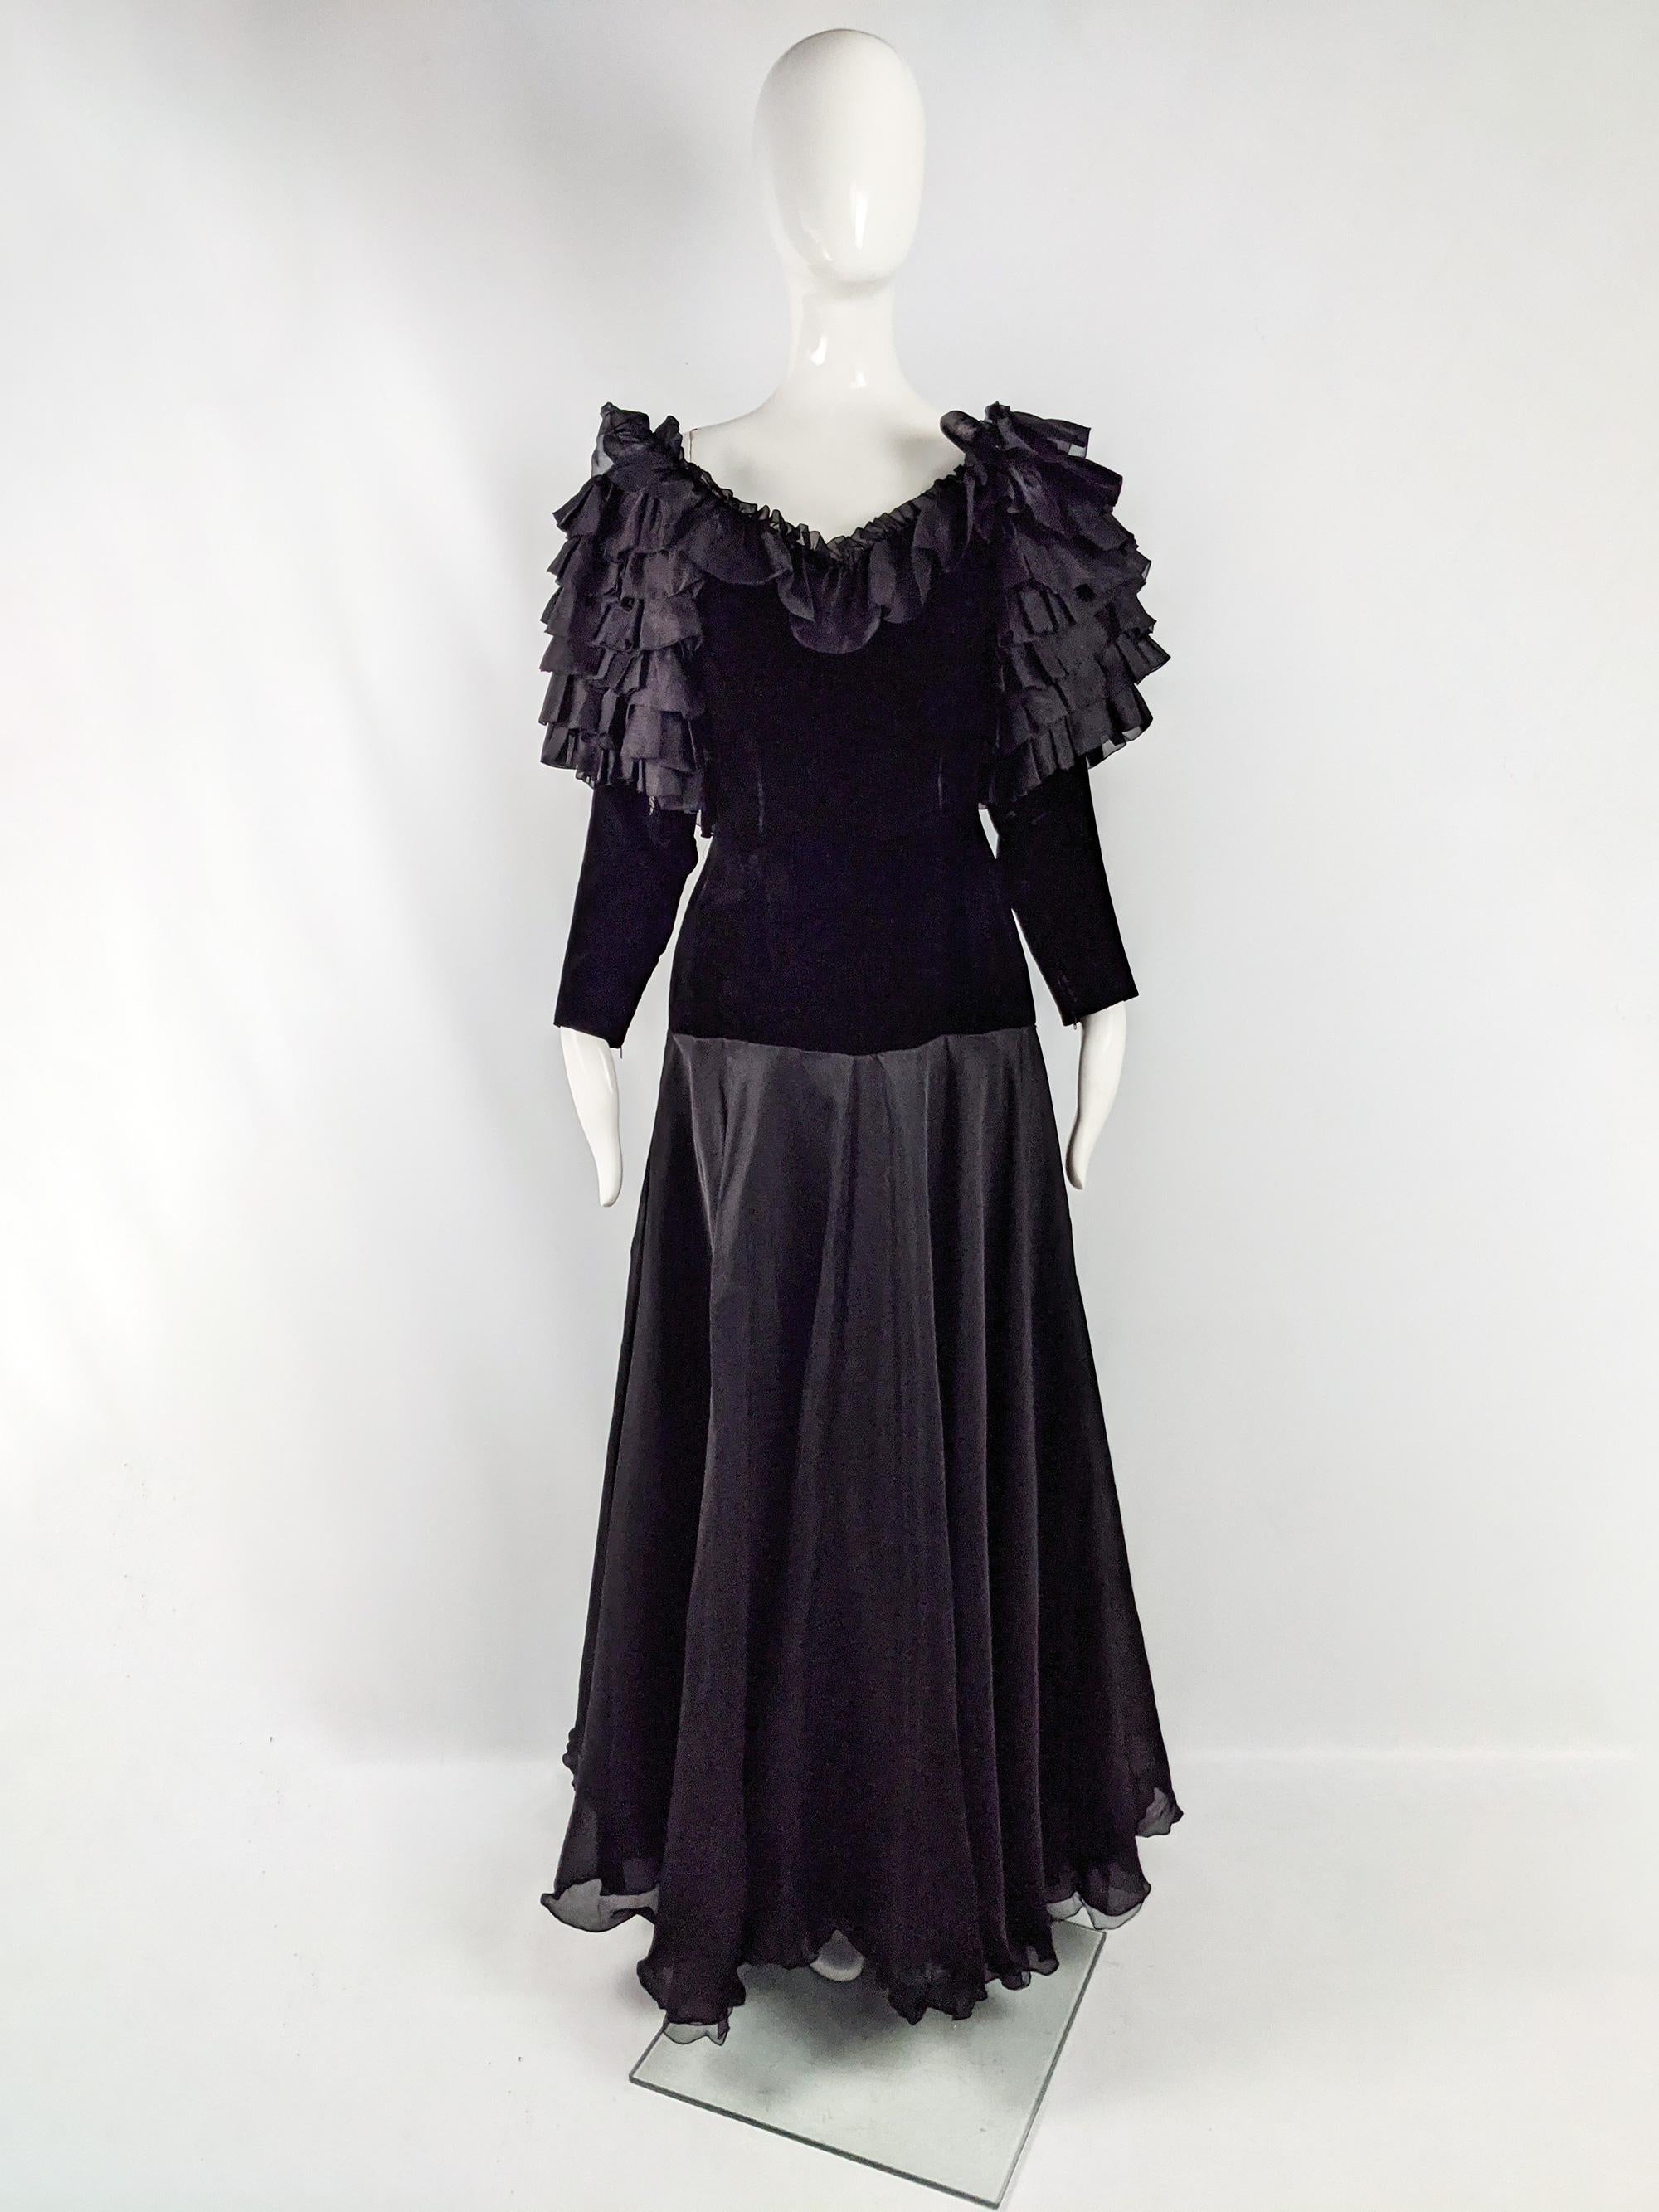 A breathtaking vintage full length, demi couture evening dress from the 80s by luxury French fashion designer, Jean Louis Scherrer. It has ruffled sleeves and a huge, full skirt. The long sleeved bodice is made of a sumptuous black velvet with